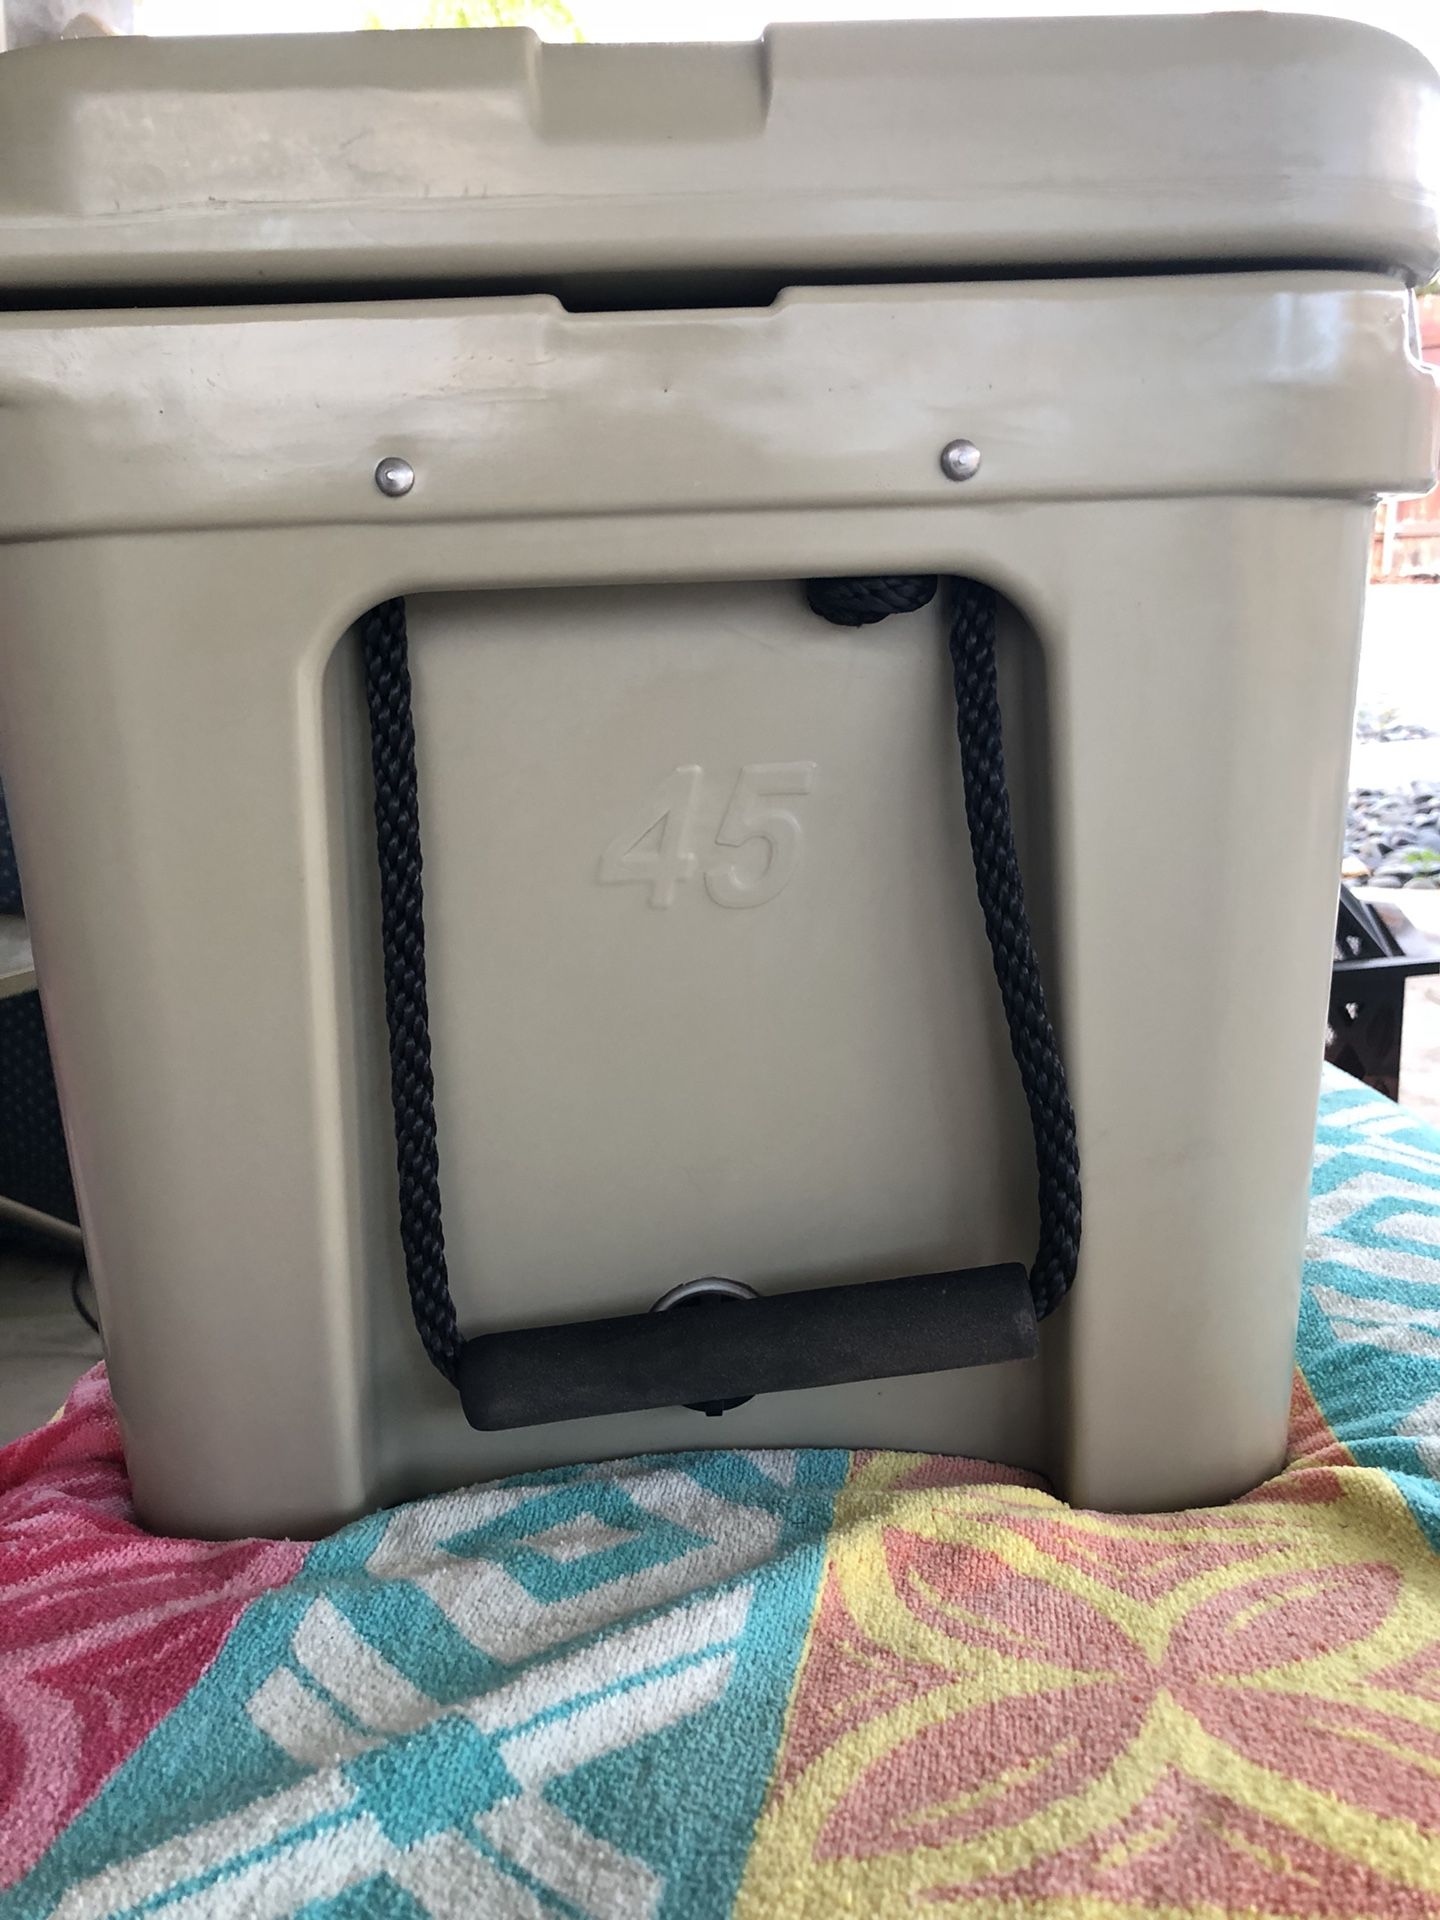 Rtic cooler 45 for Sale in San Diego, CA - OfferUp